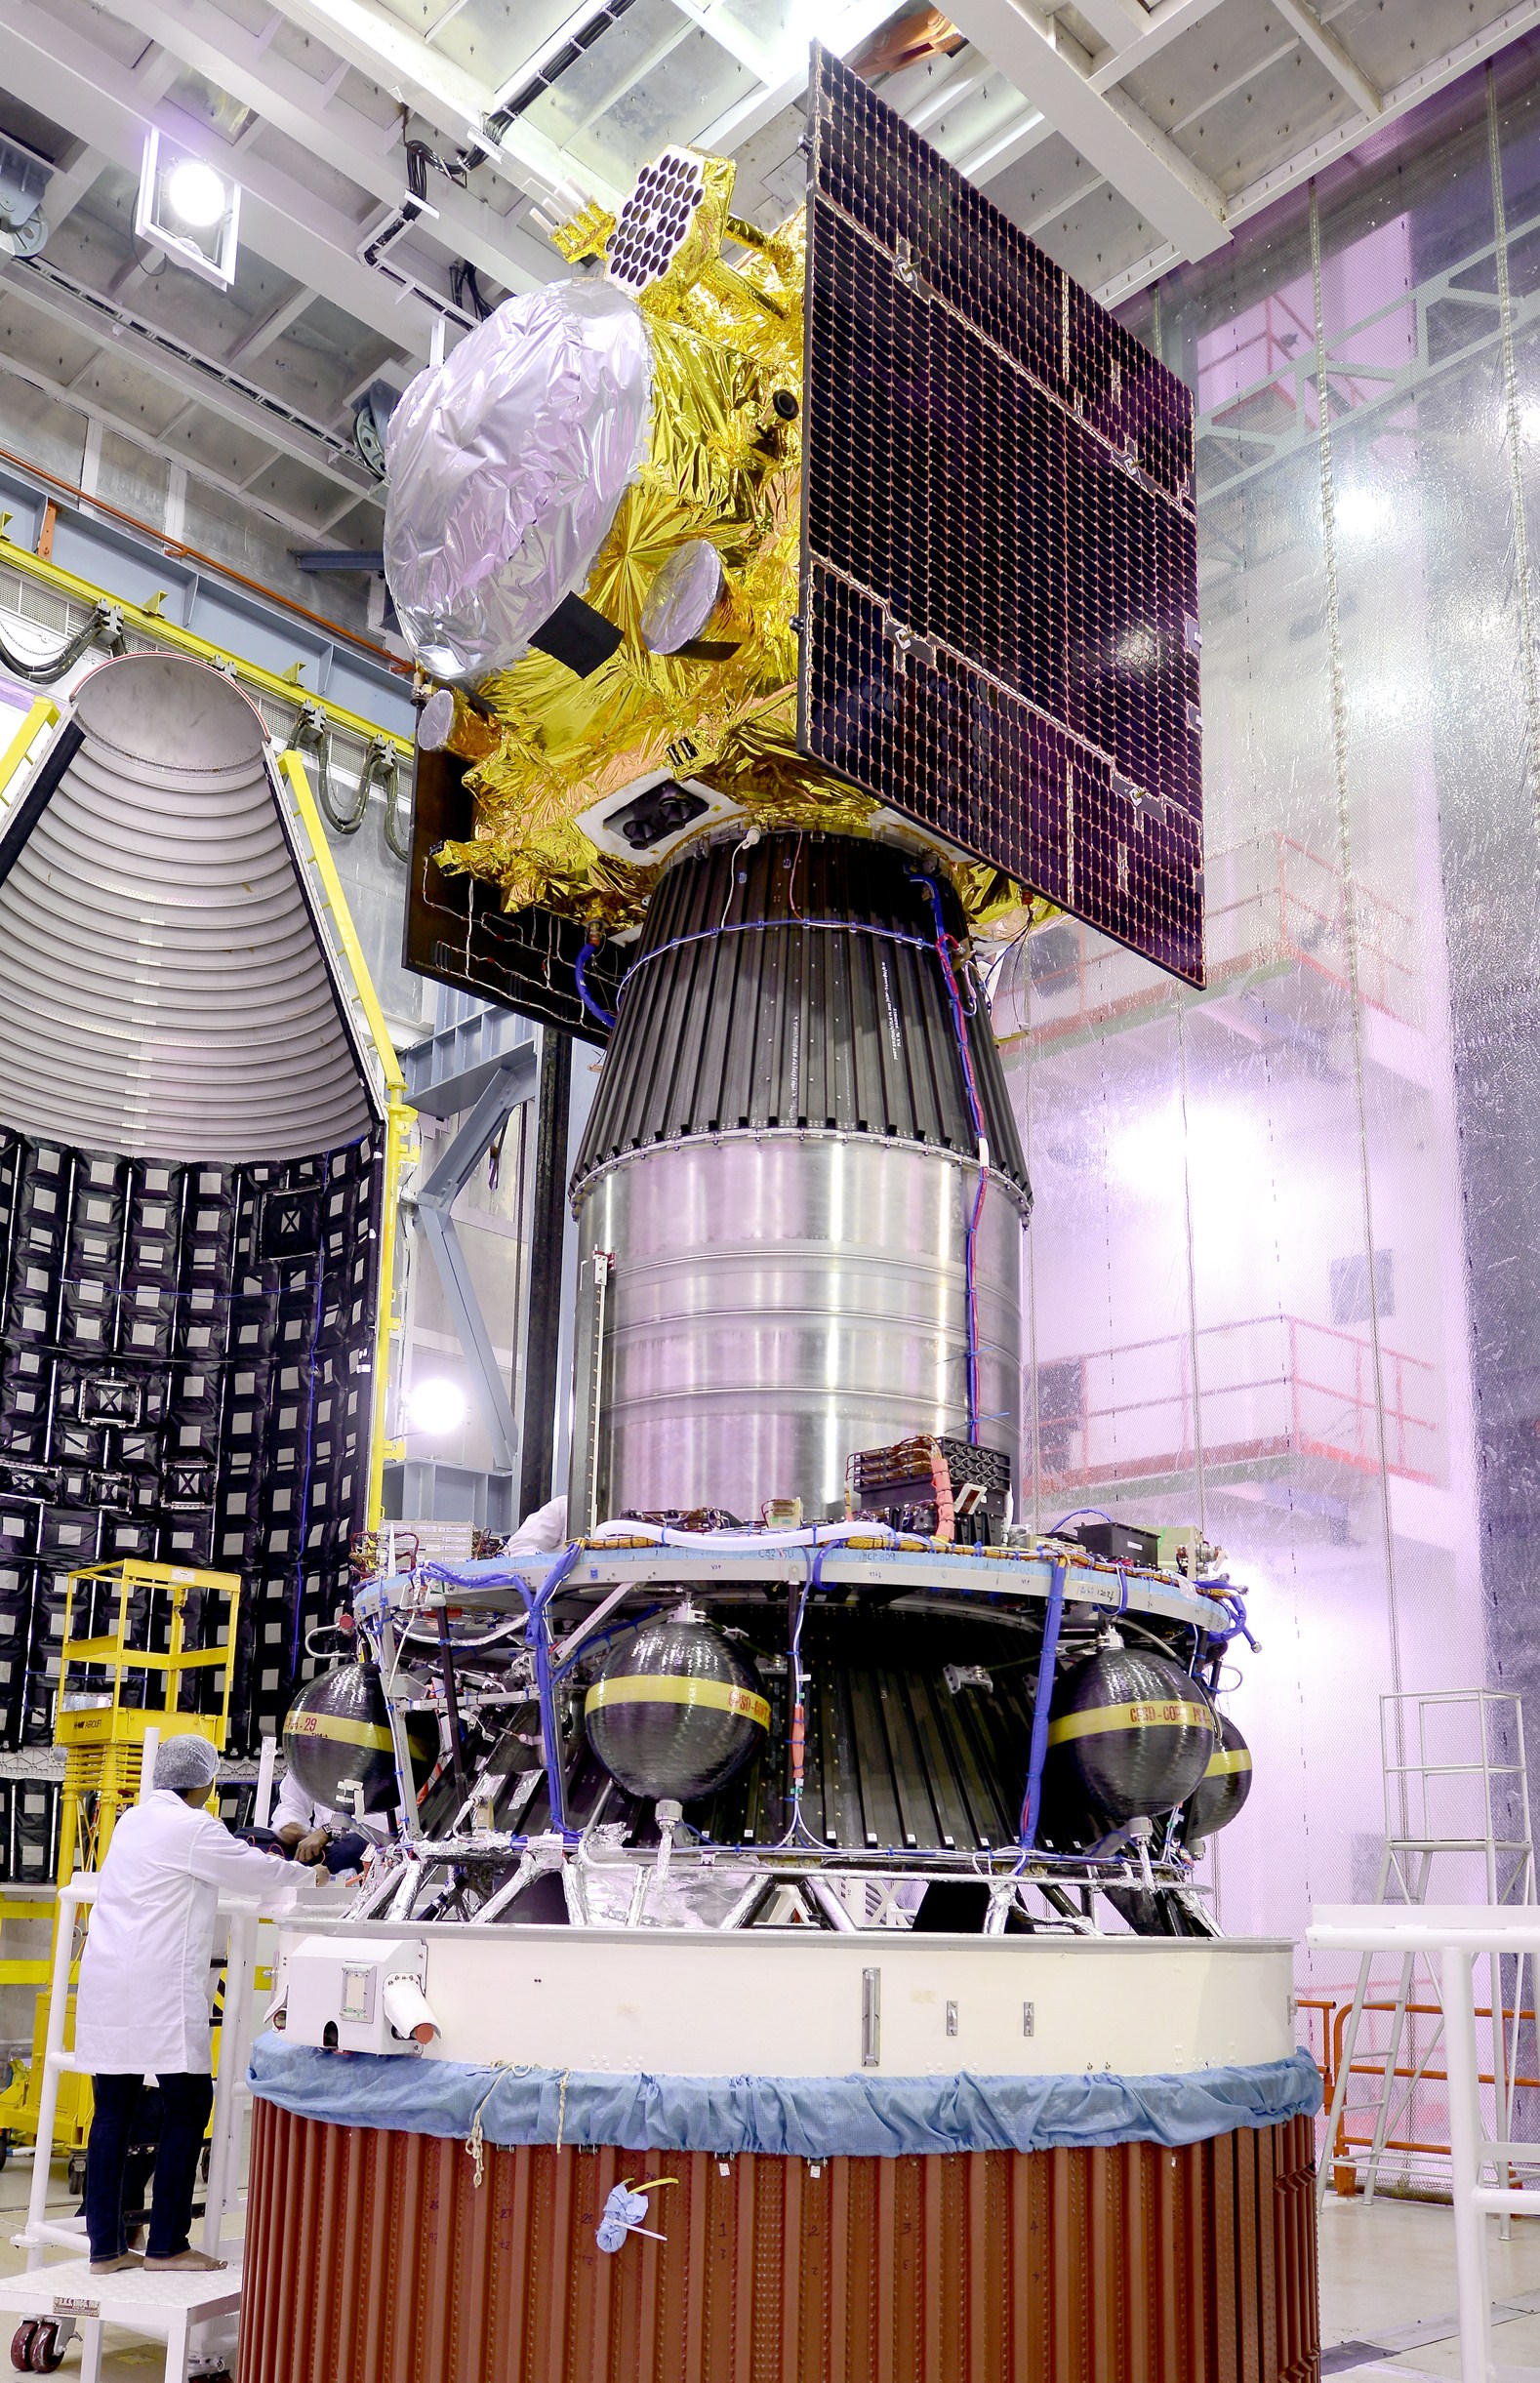 Today ISRO is going to launch its 6th navigation Satellite.